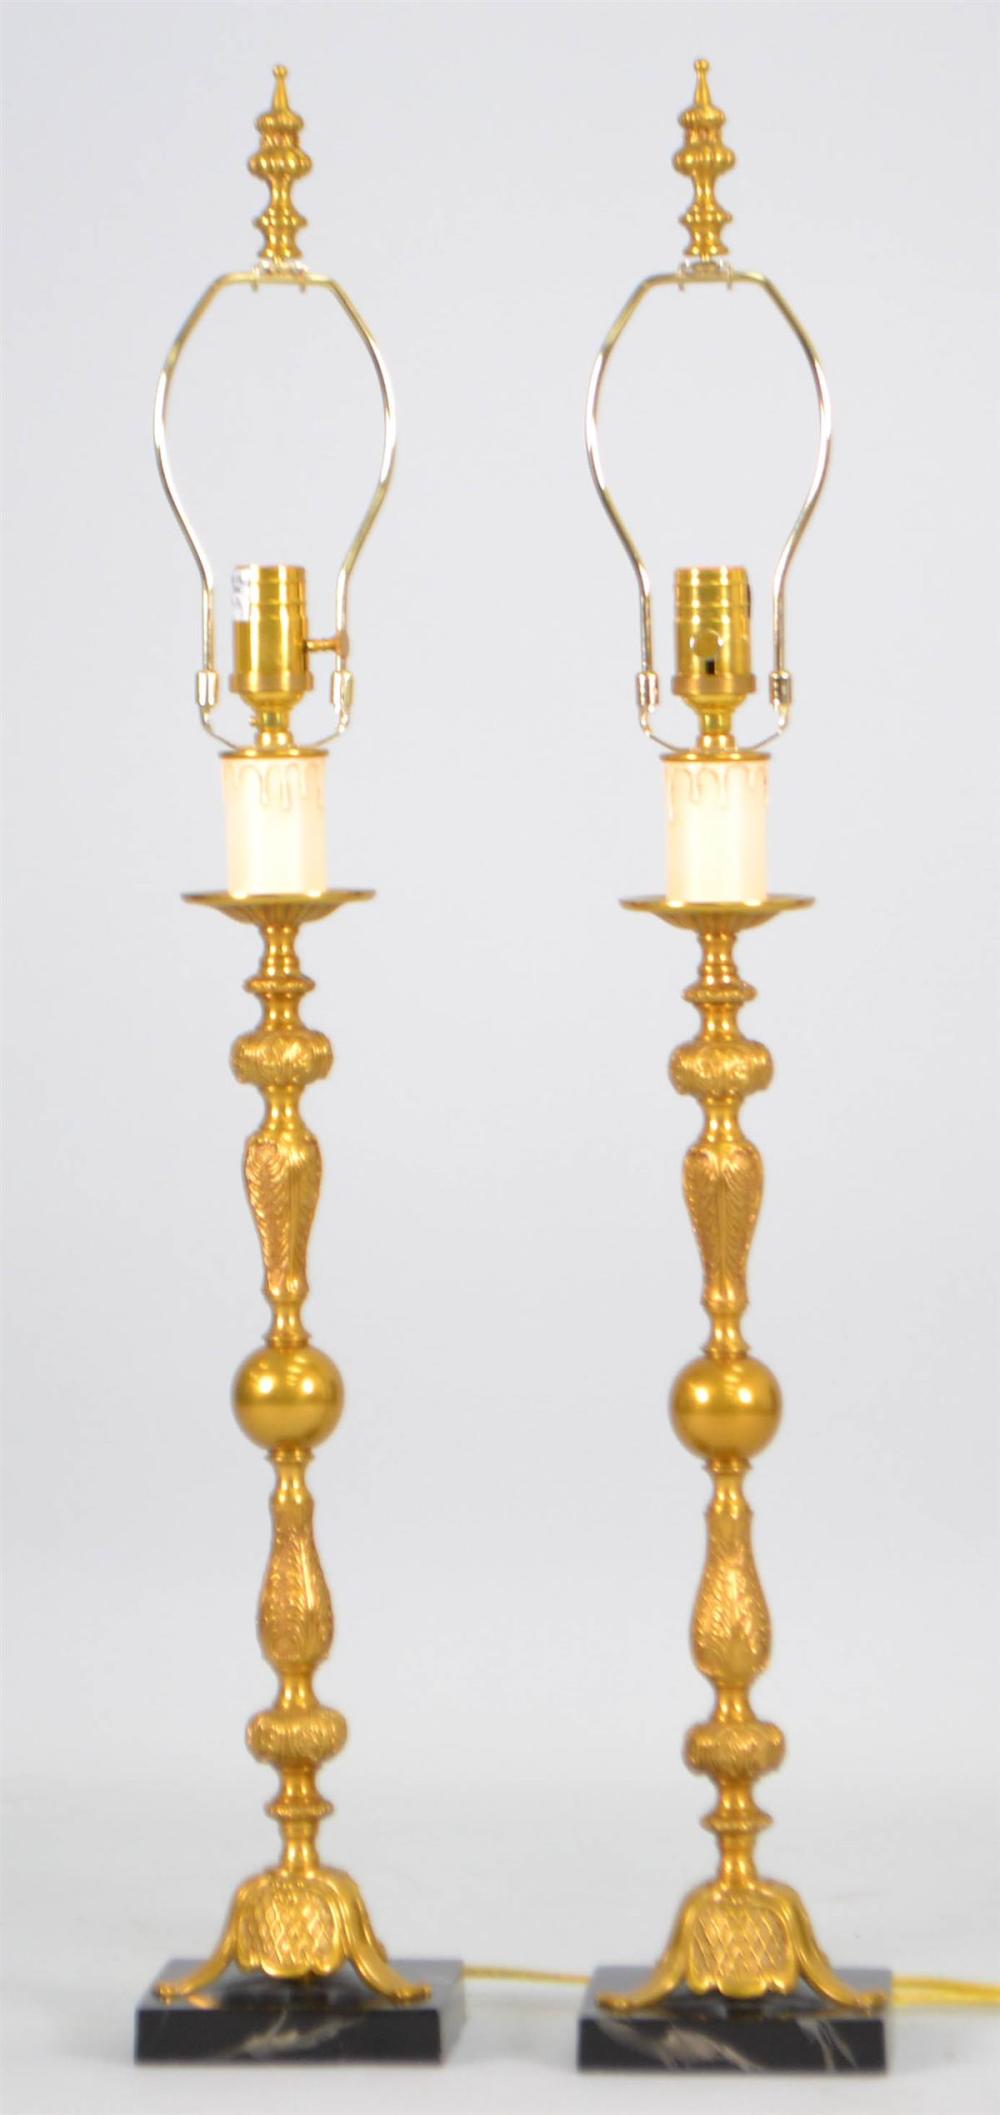 PAIR OF ROCOCO STYLE CAST BRASS